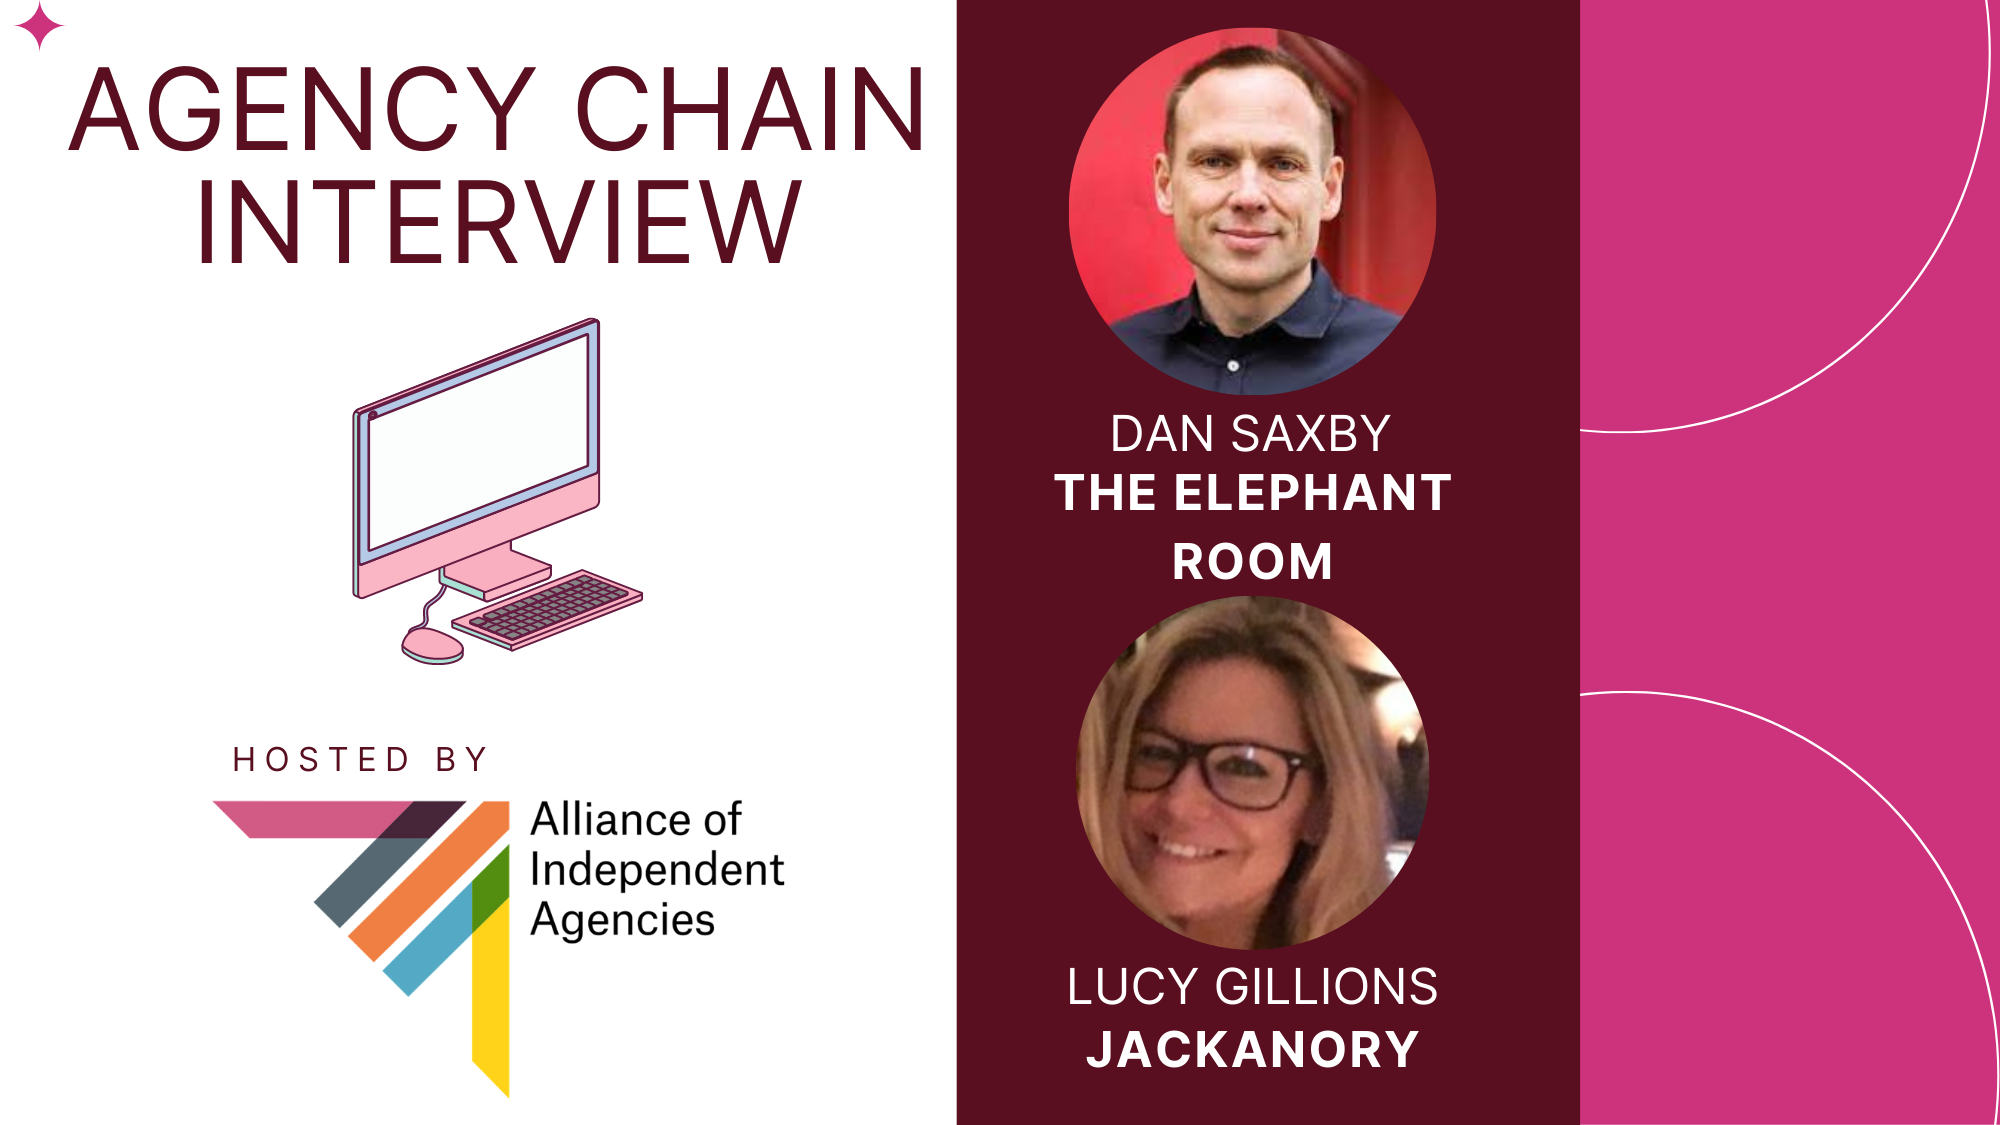 Agency Chain Interviews: The Elephant Room meets Jackanory